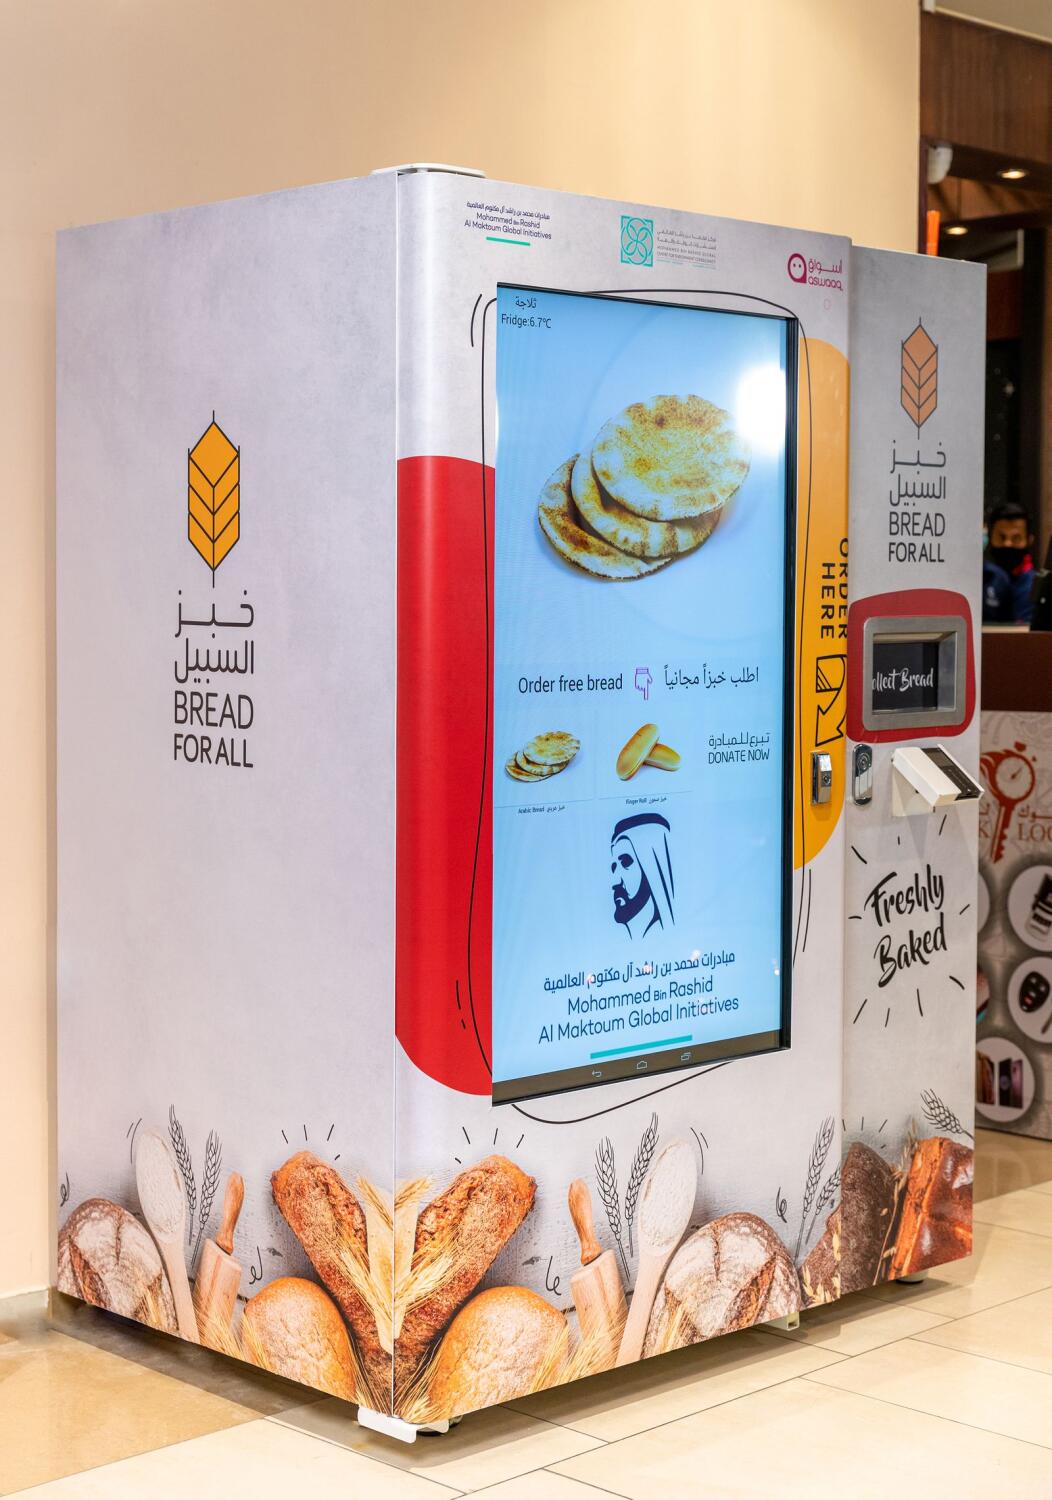 New vending machines to distribute free freshly-baked bread to needy residents